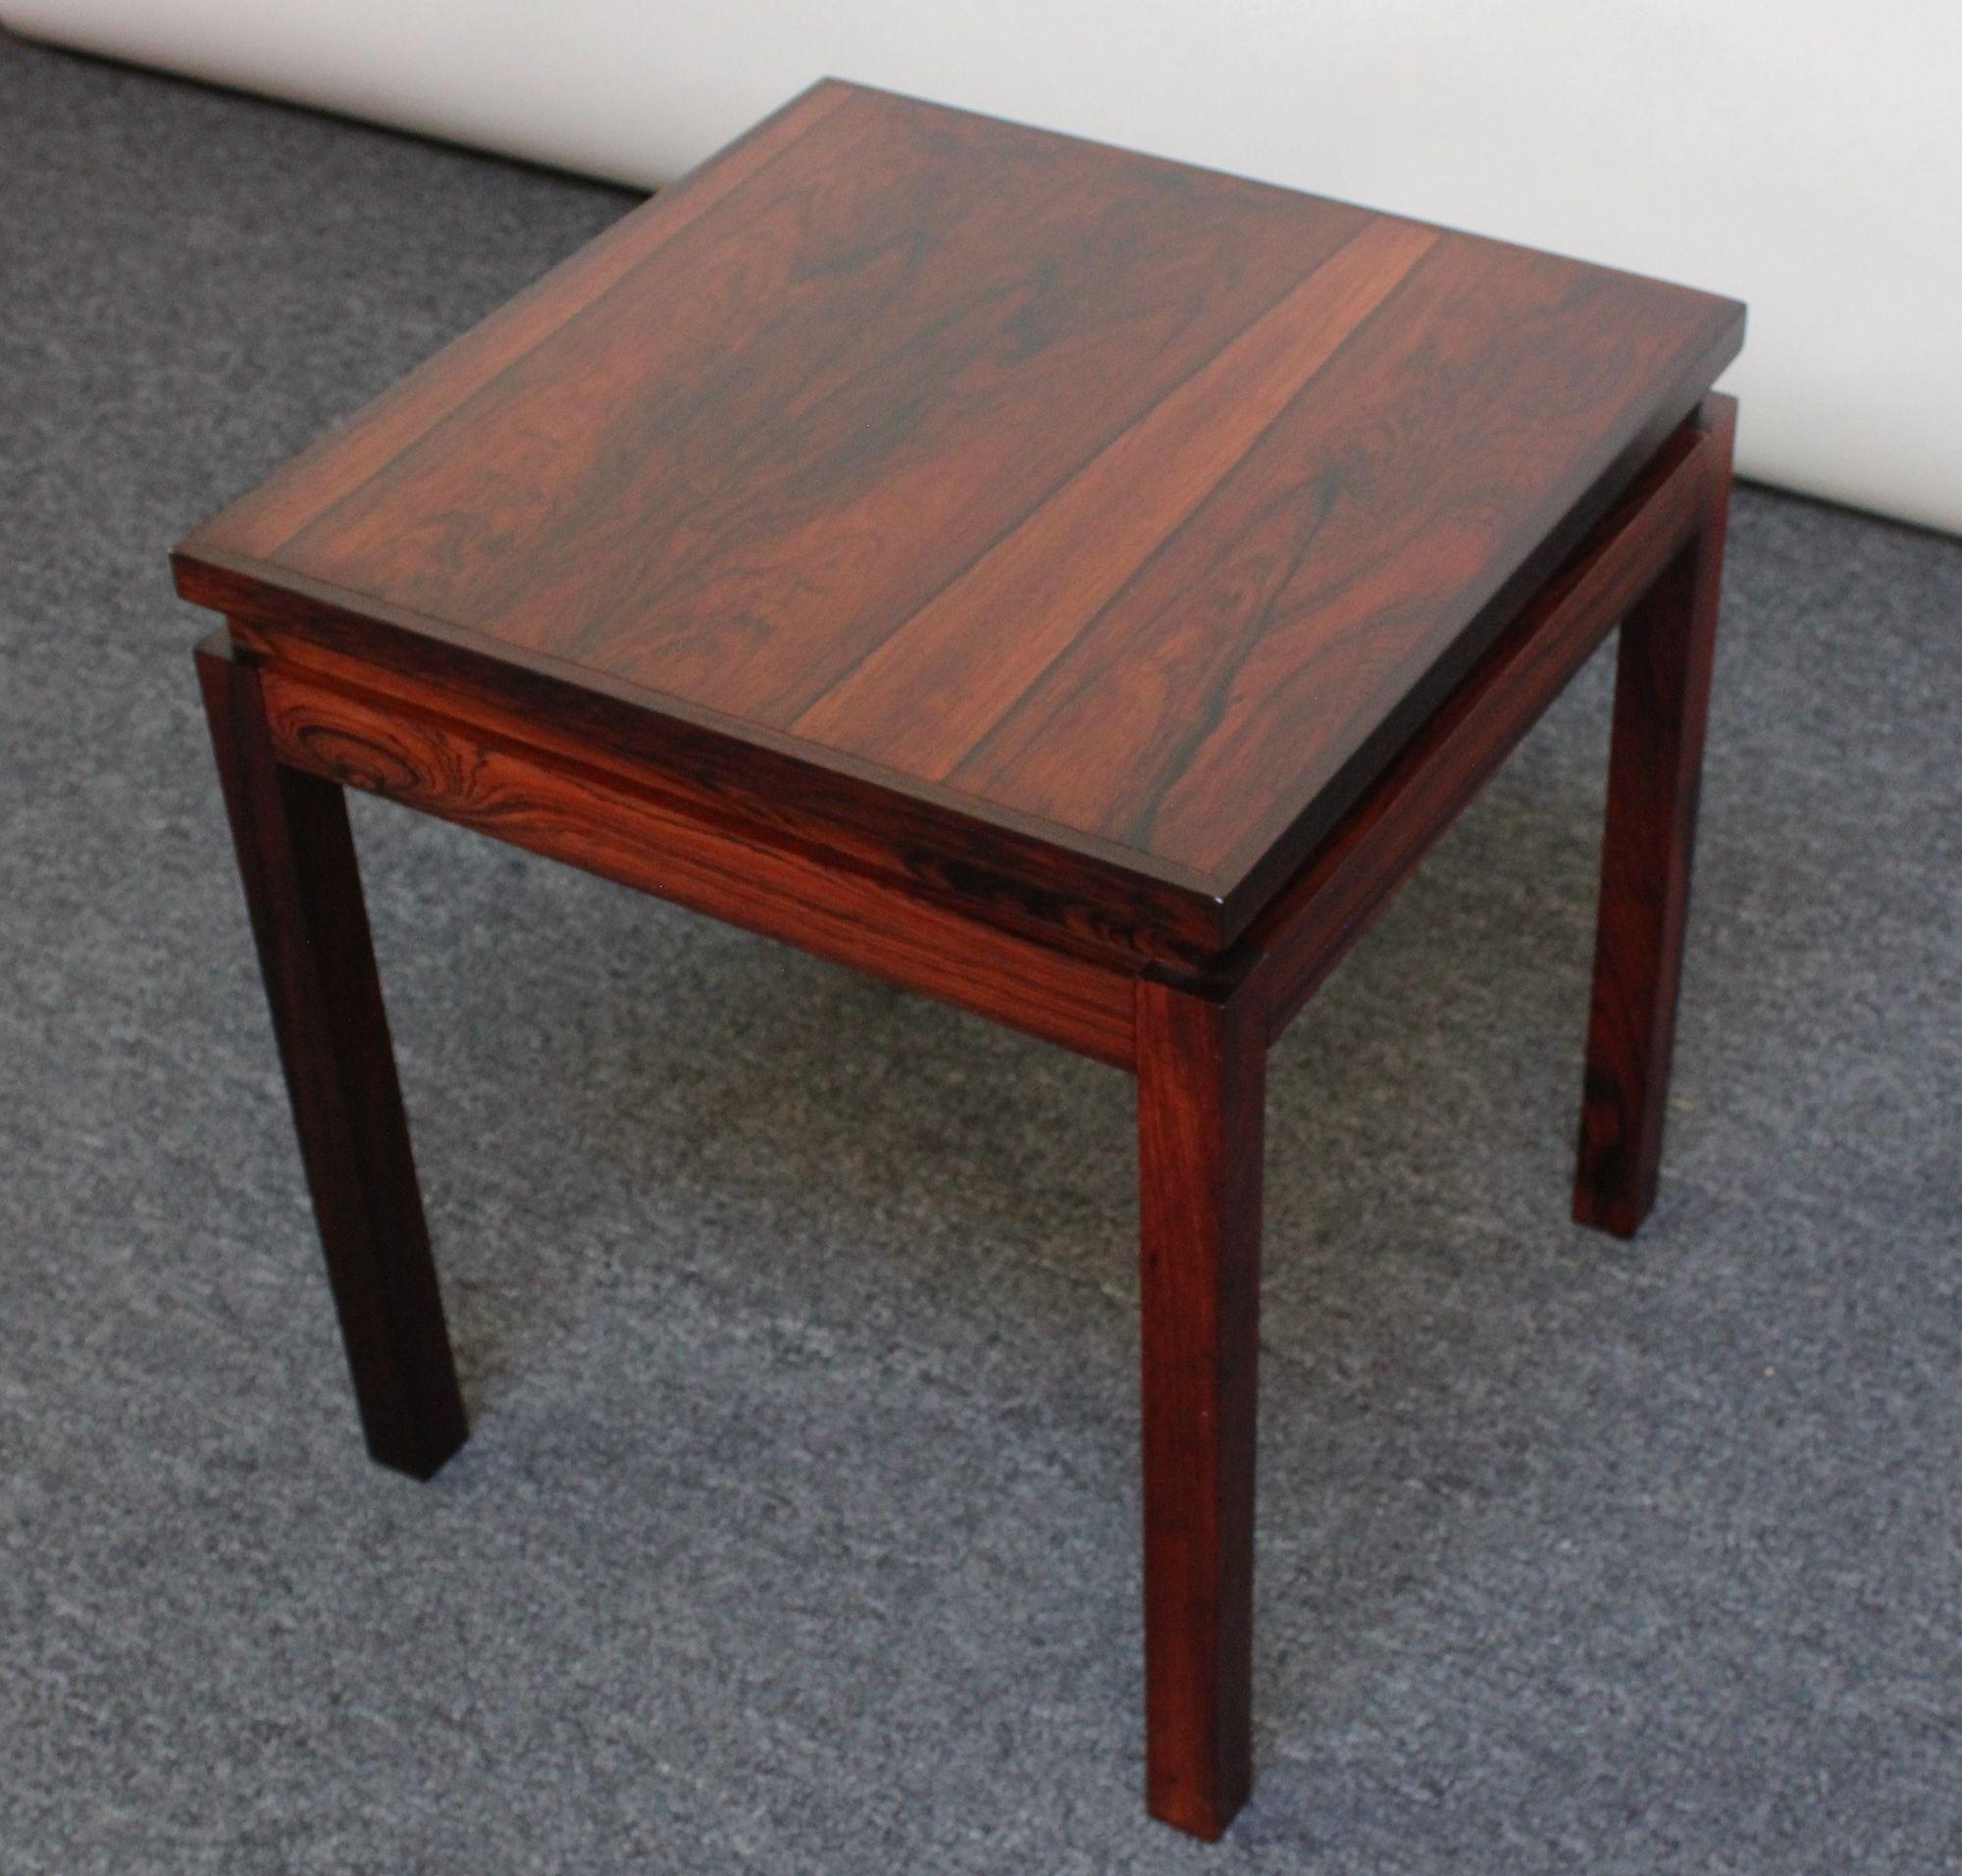 Mid-20th Century Danish Modern Rosewood Side Table by Poul Hundevad for Fabian